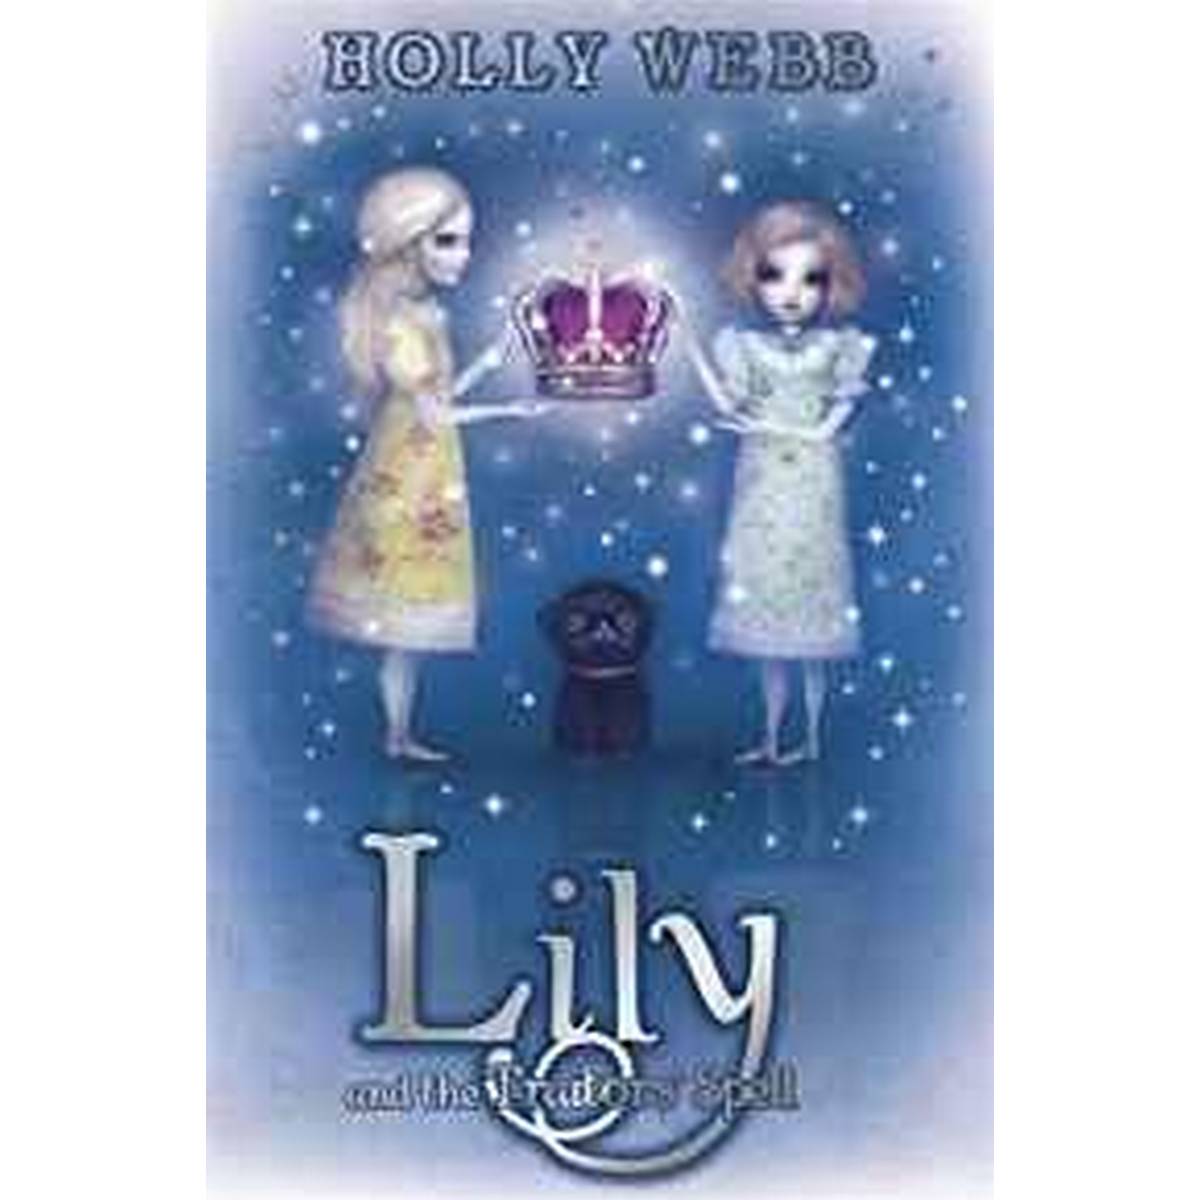 Lily and the Traitors' Spell: Book 4